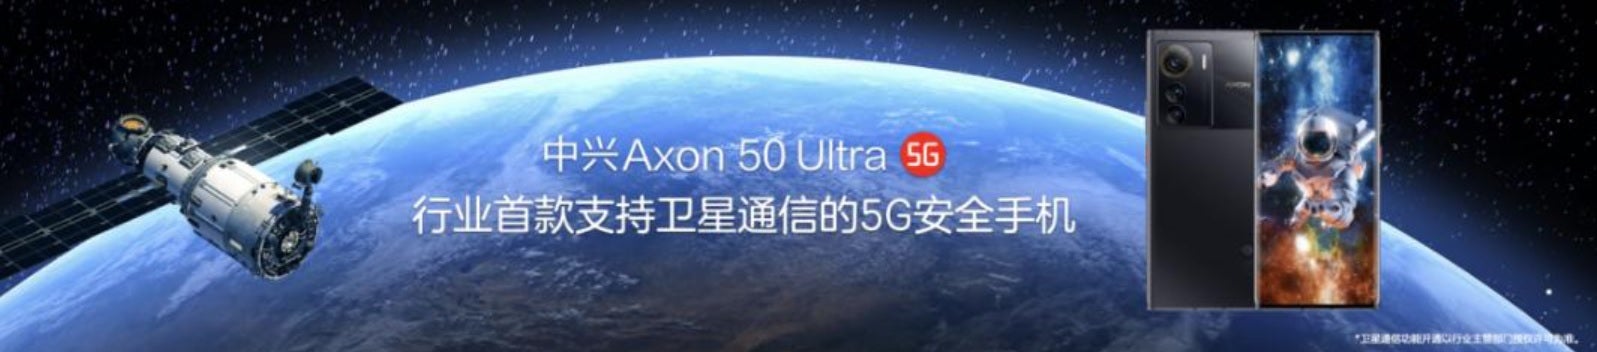 The ZTE Axon 50 Ultra allows users to engage in two-way SMS messaging via satellite when there is no cellular service - ZTE Axon 50 Ultra unveiled with satellite messaging and hefty battery